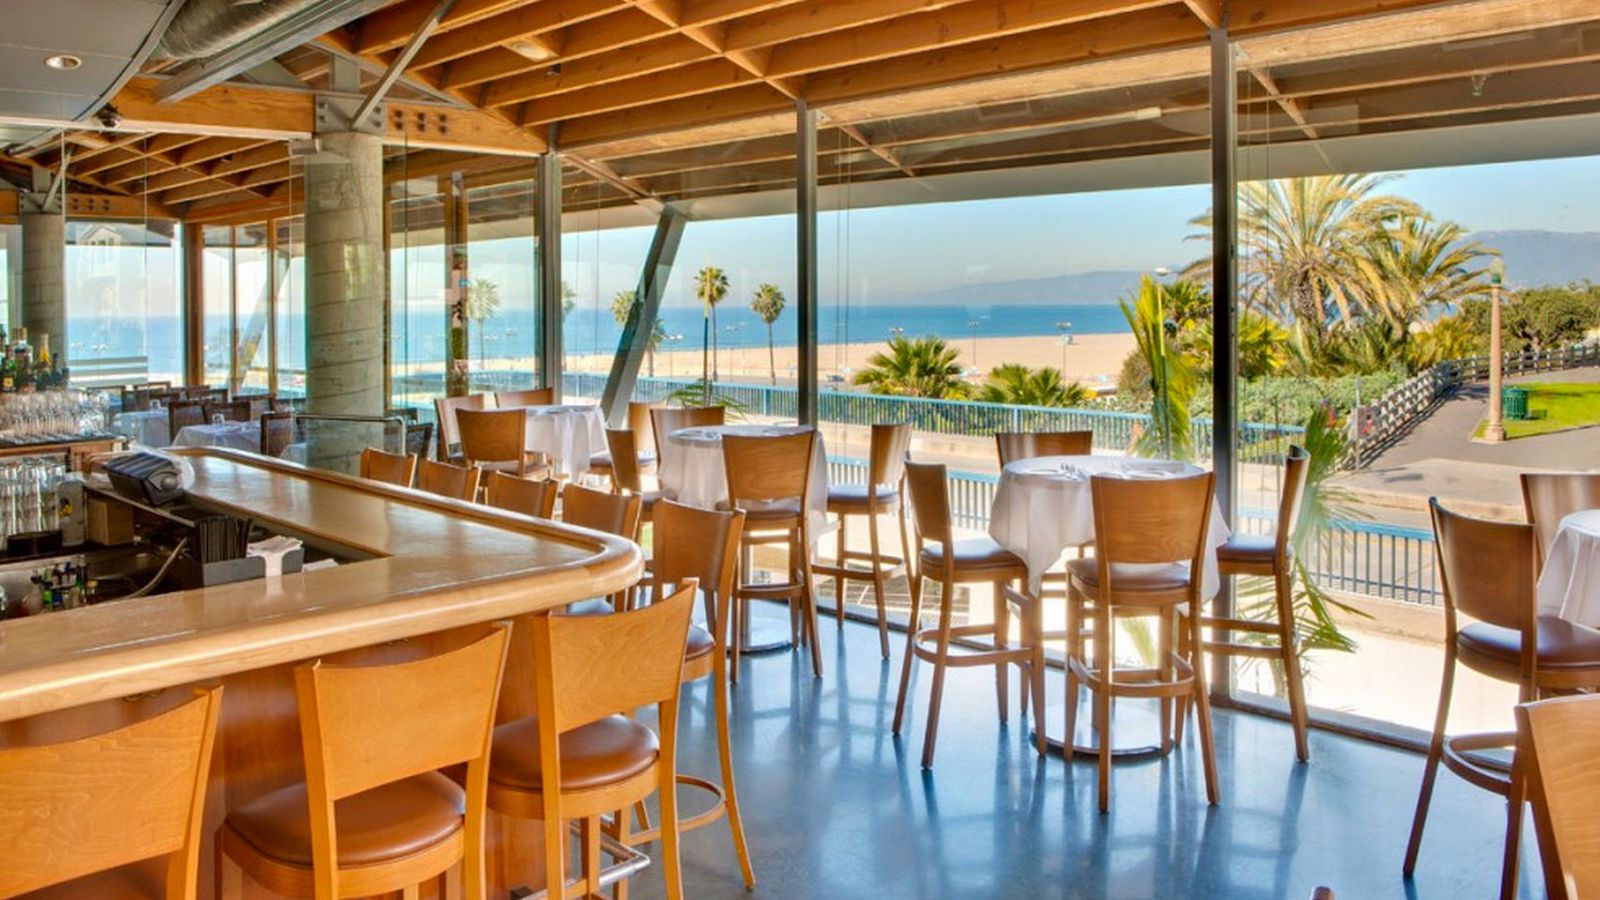 18 Restaurants With Amazing Views in Los Angeles - Eater LA